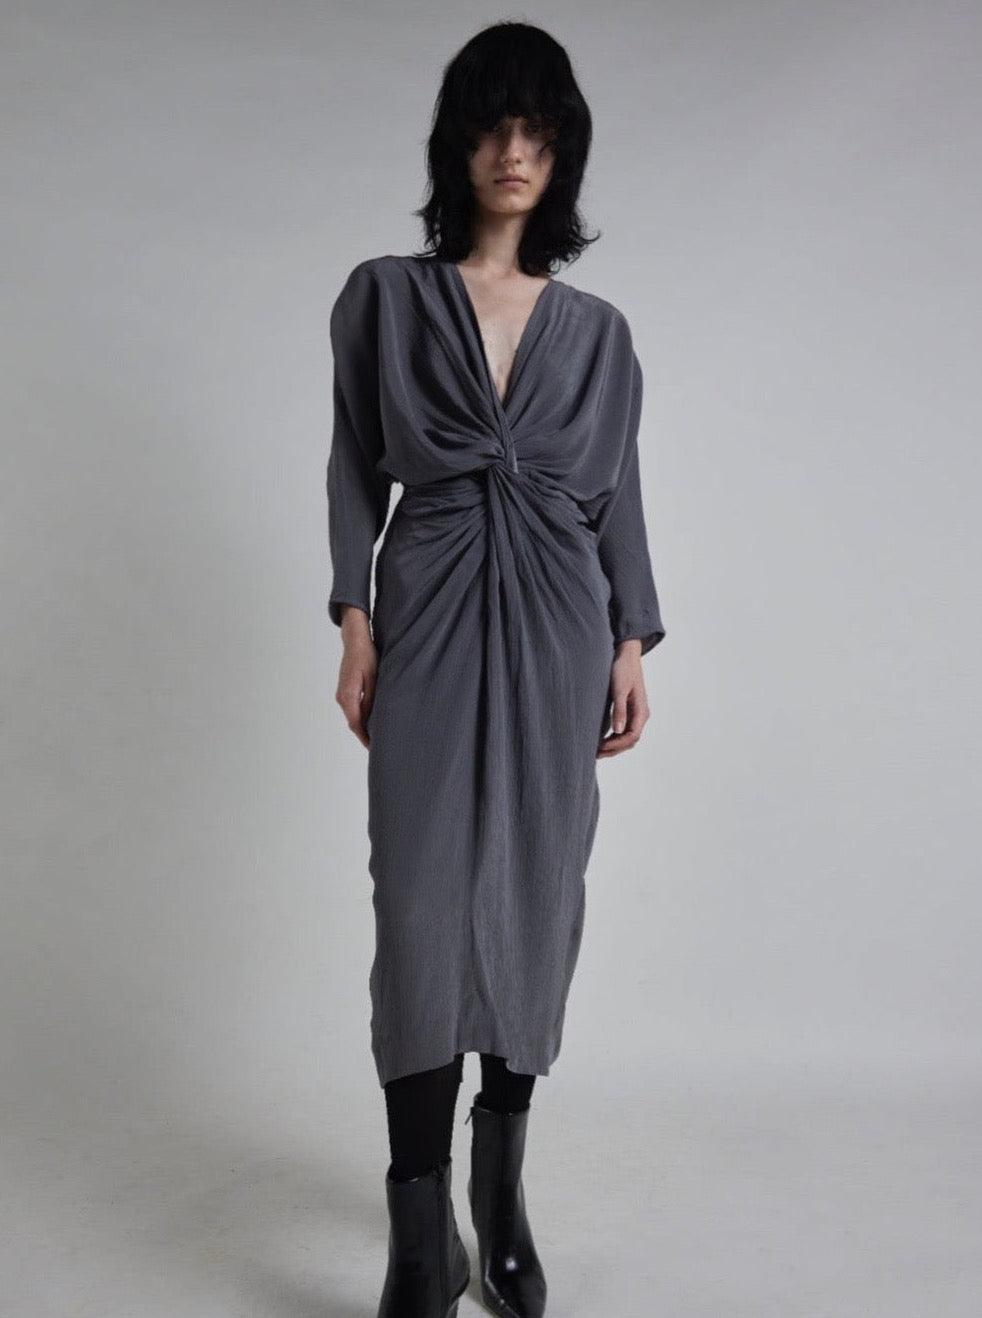 Vintage 1980s Grey Dress With Front Knot Detail - WŪHAŪS